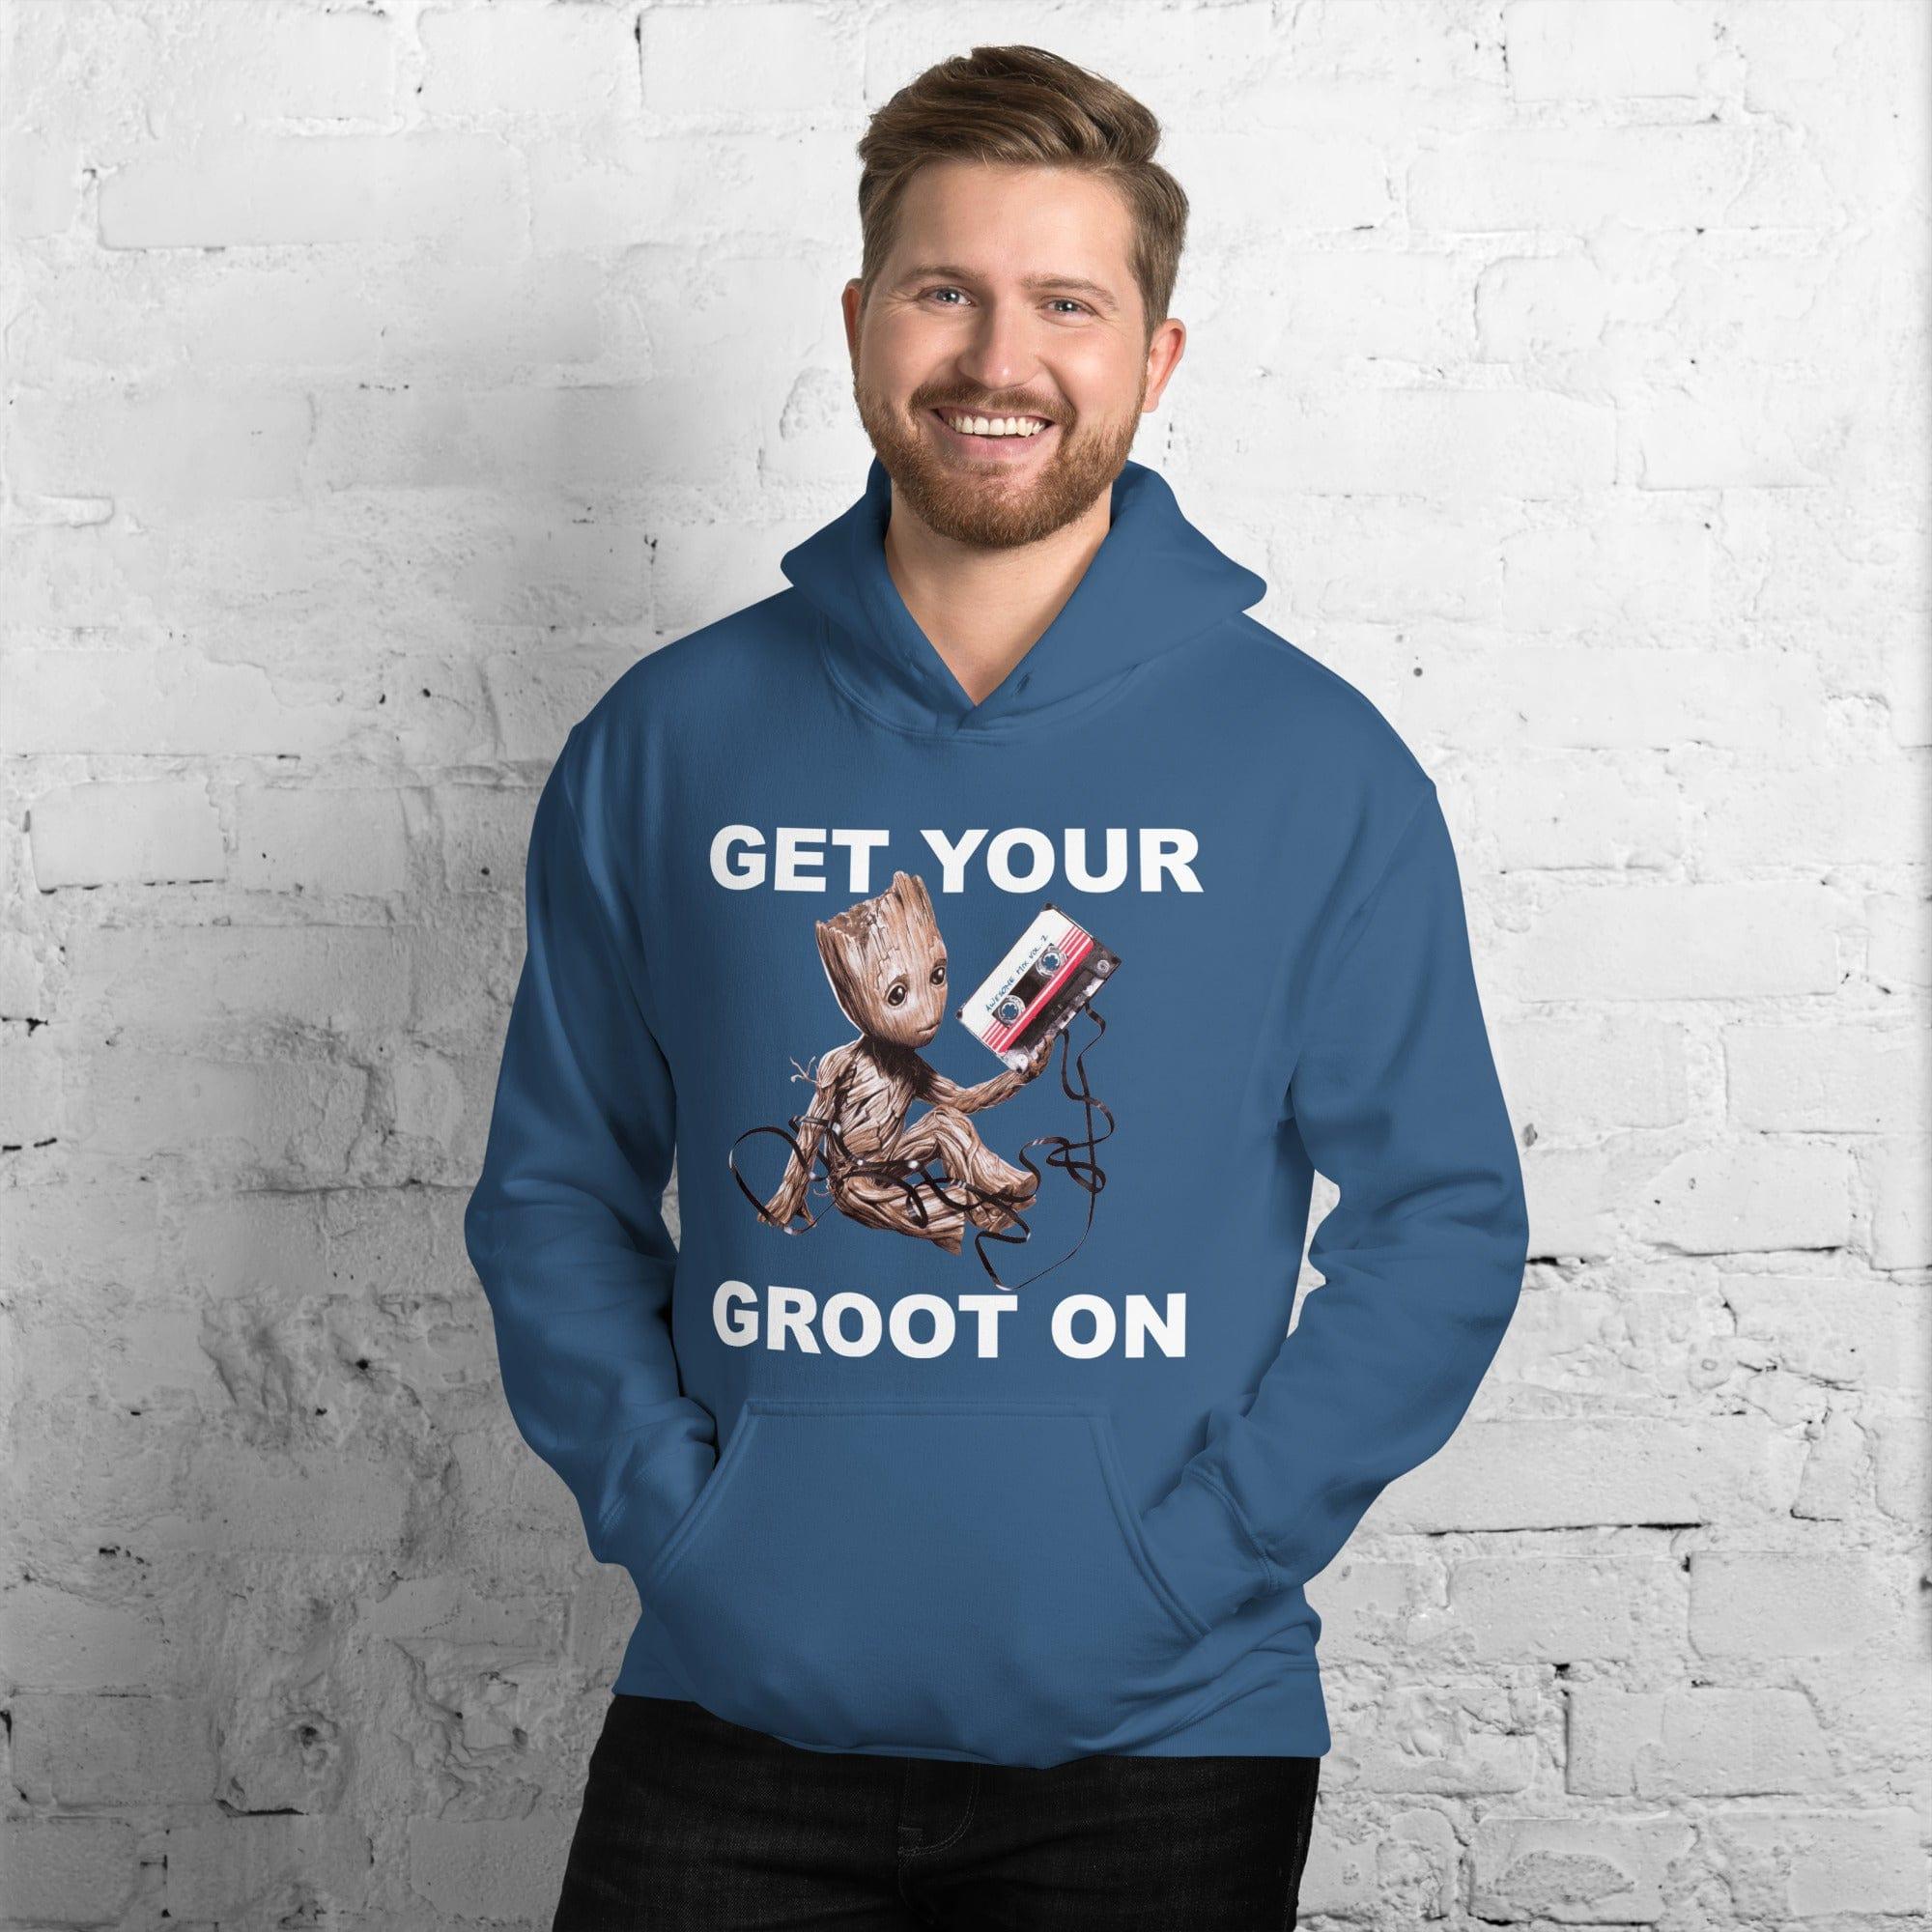 Guardians of the Galaxy Hoodie Movie Character Groot Get Your Groot On - TopKoalaTee